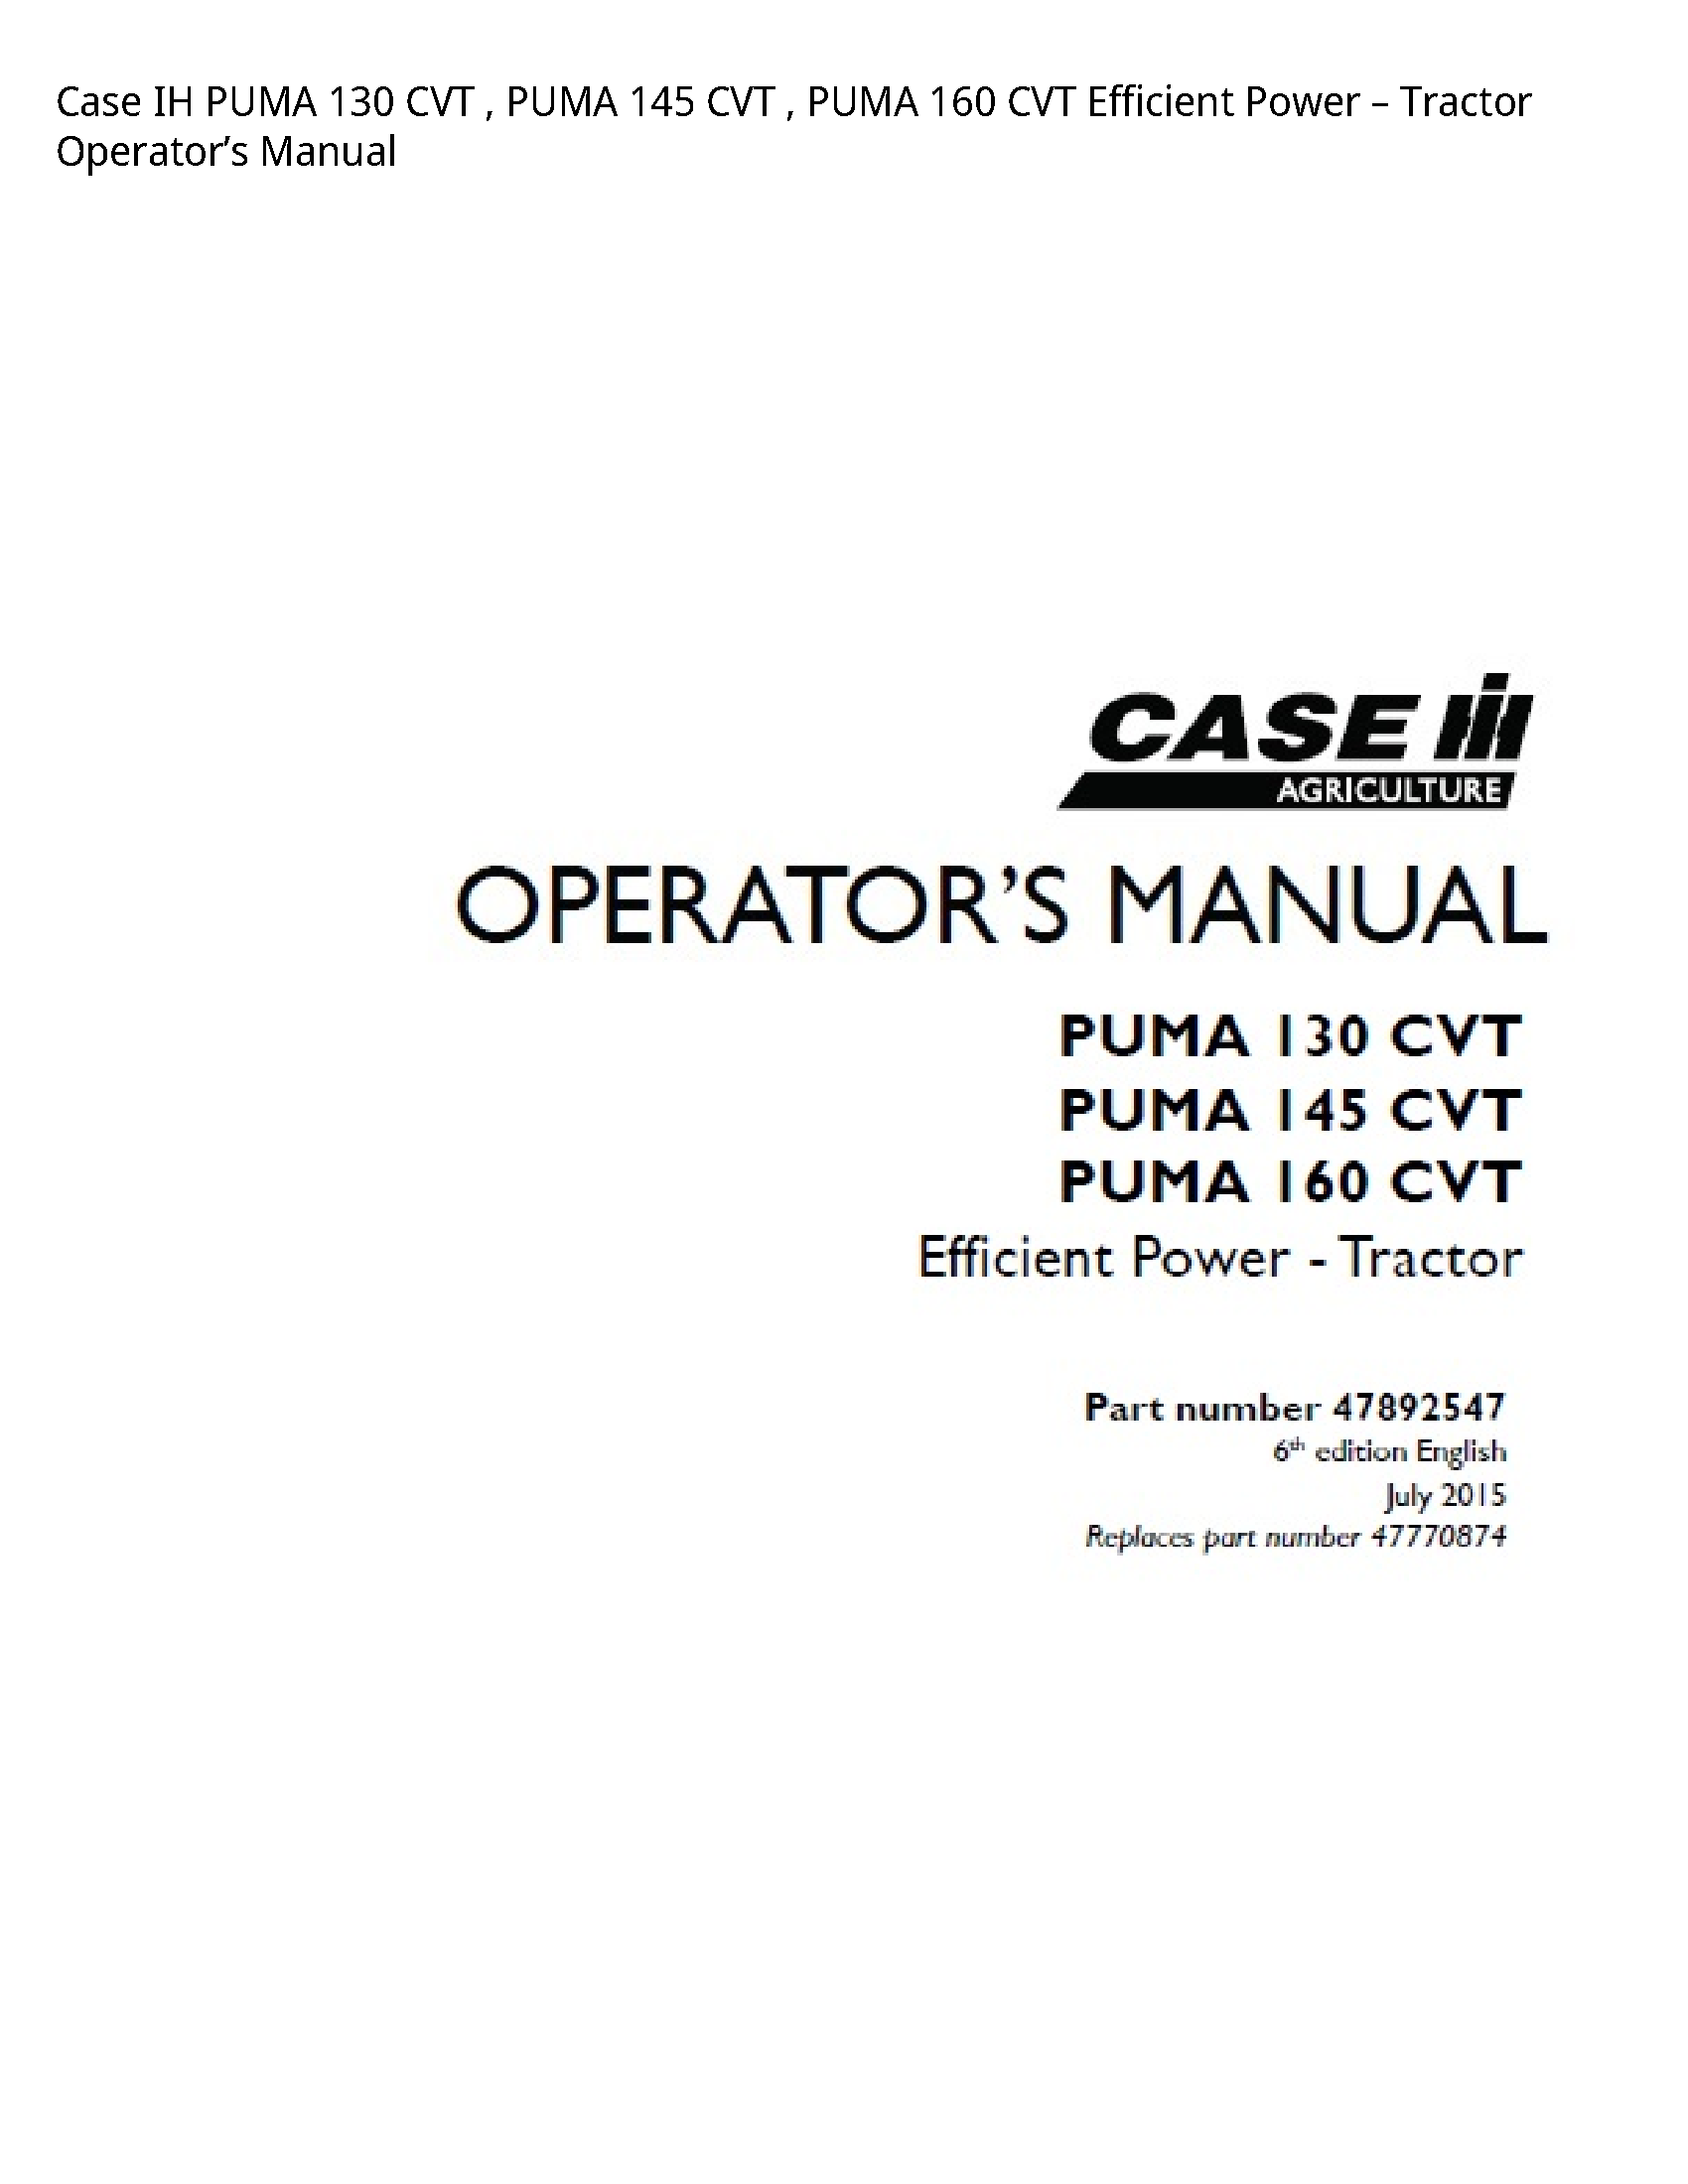 Case/Case IH 130 IH PUMA CVT PUMA CVT PUMA CVT Efficient Power Tractor Operator’s manual